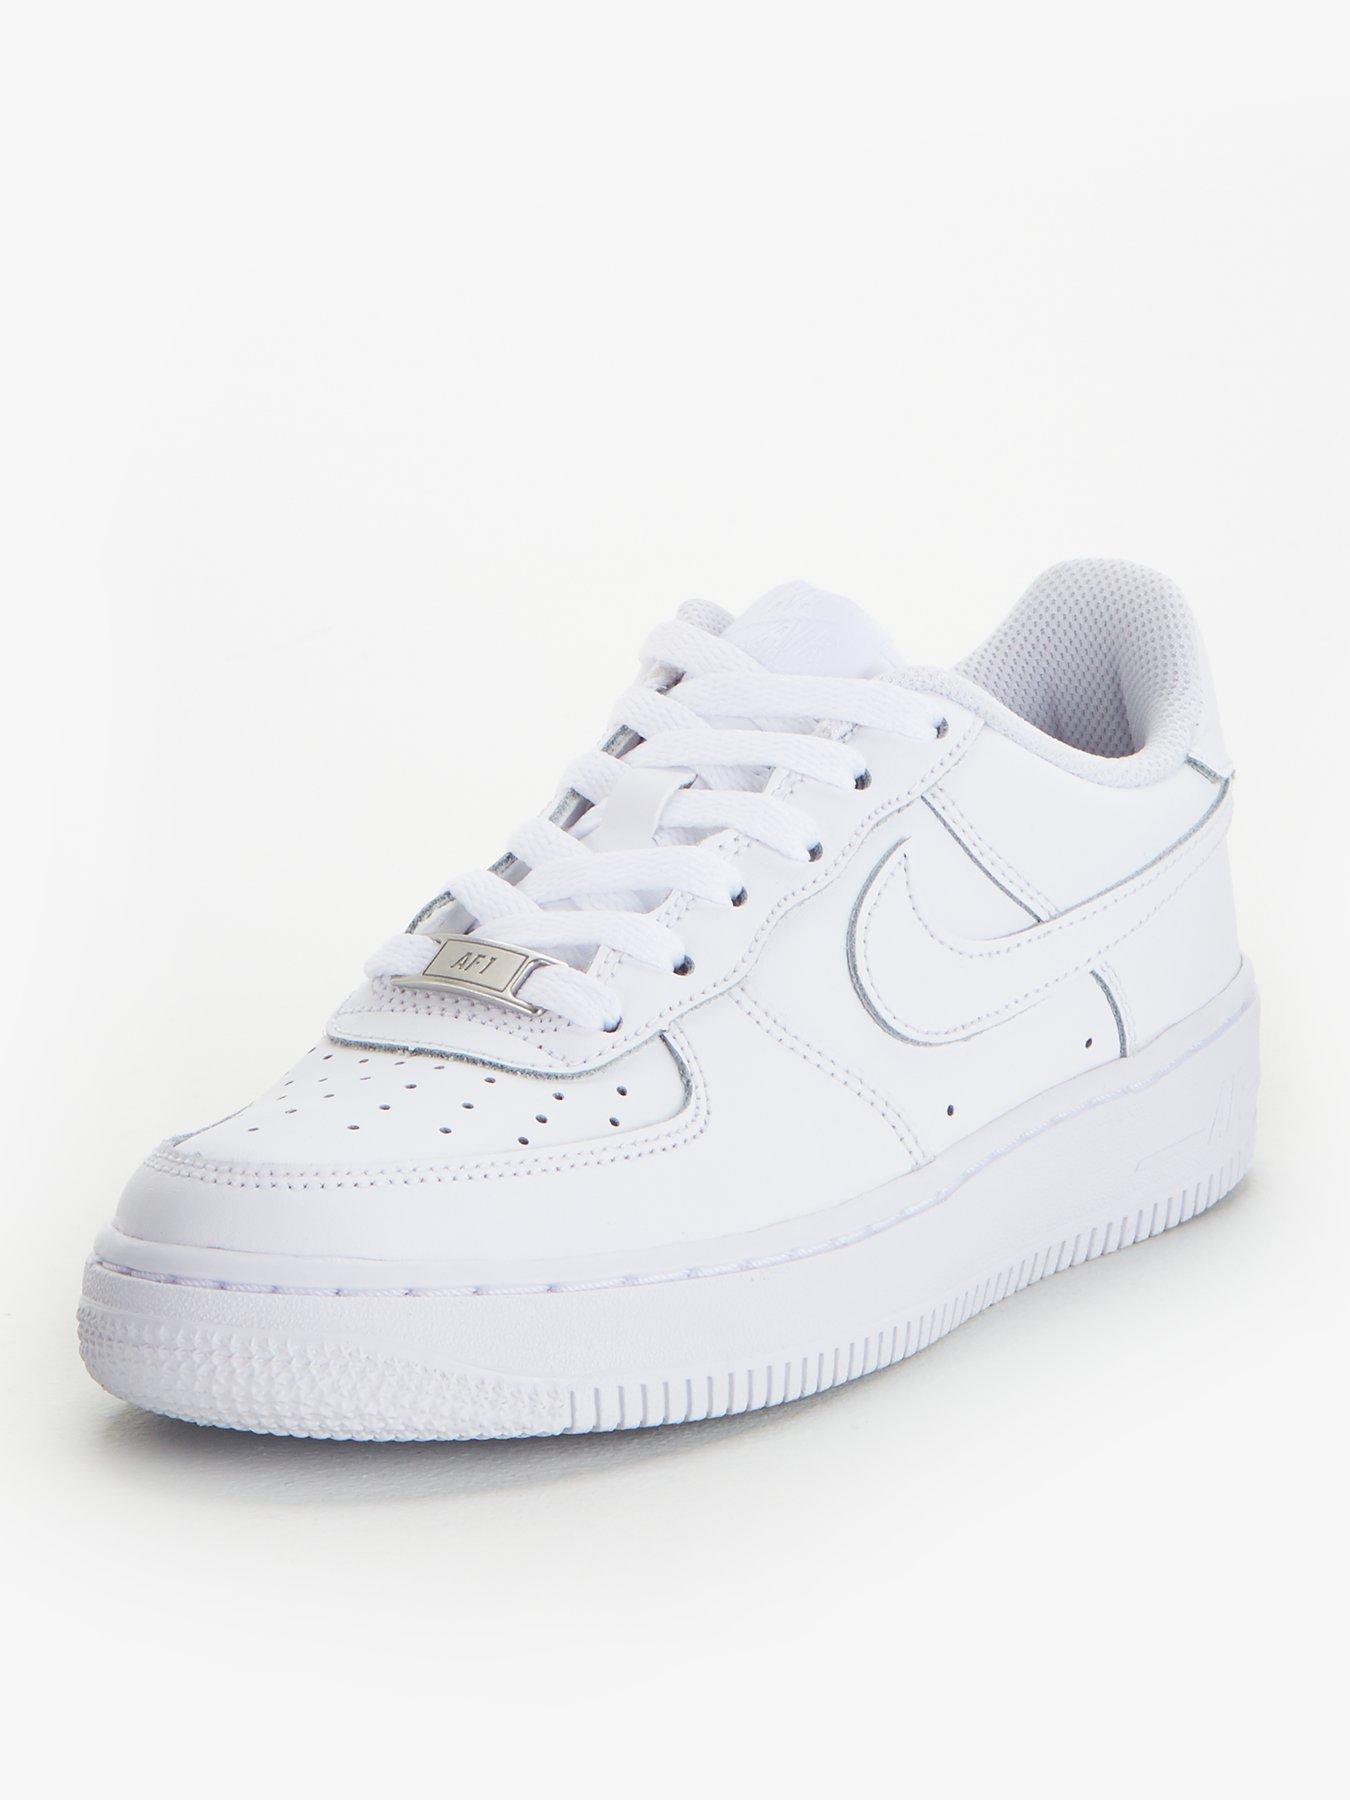 nike air force 1 size 6.5 junior